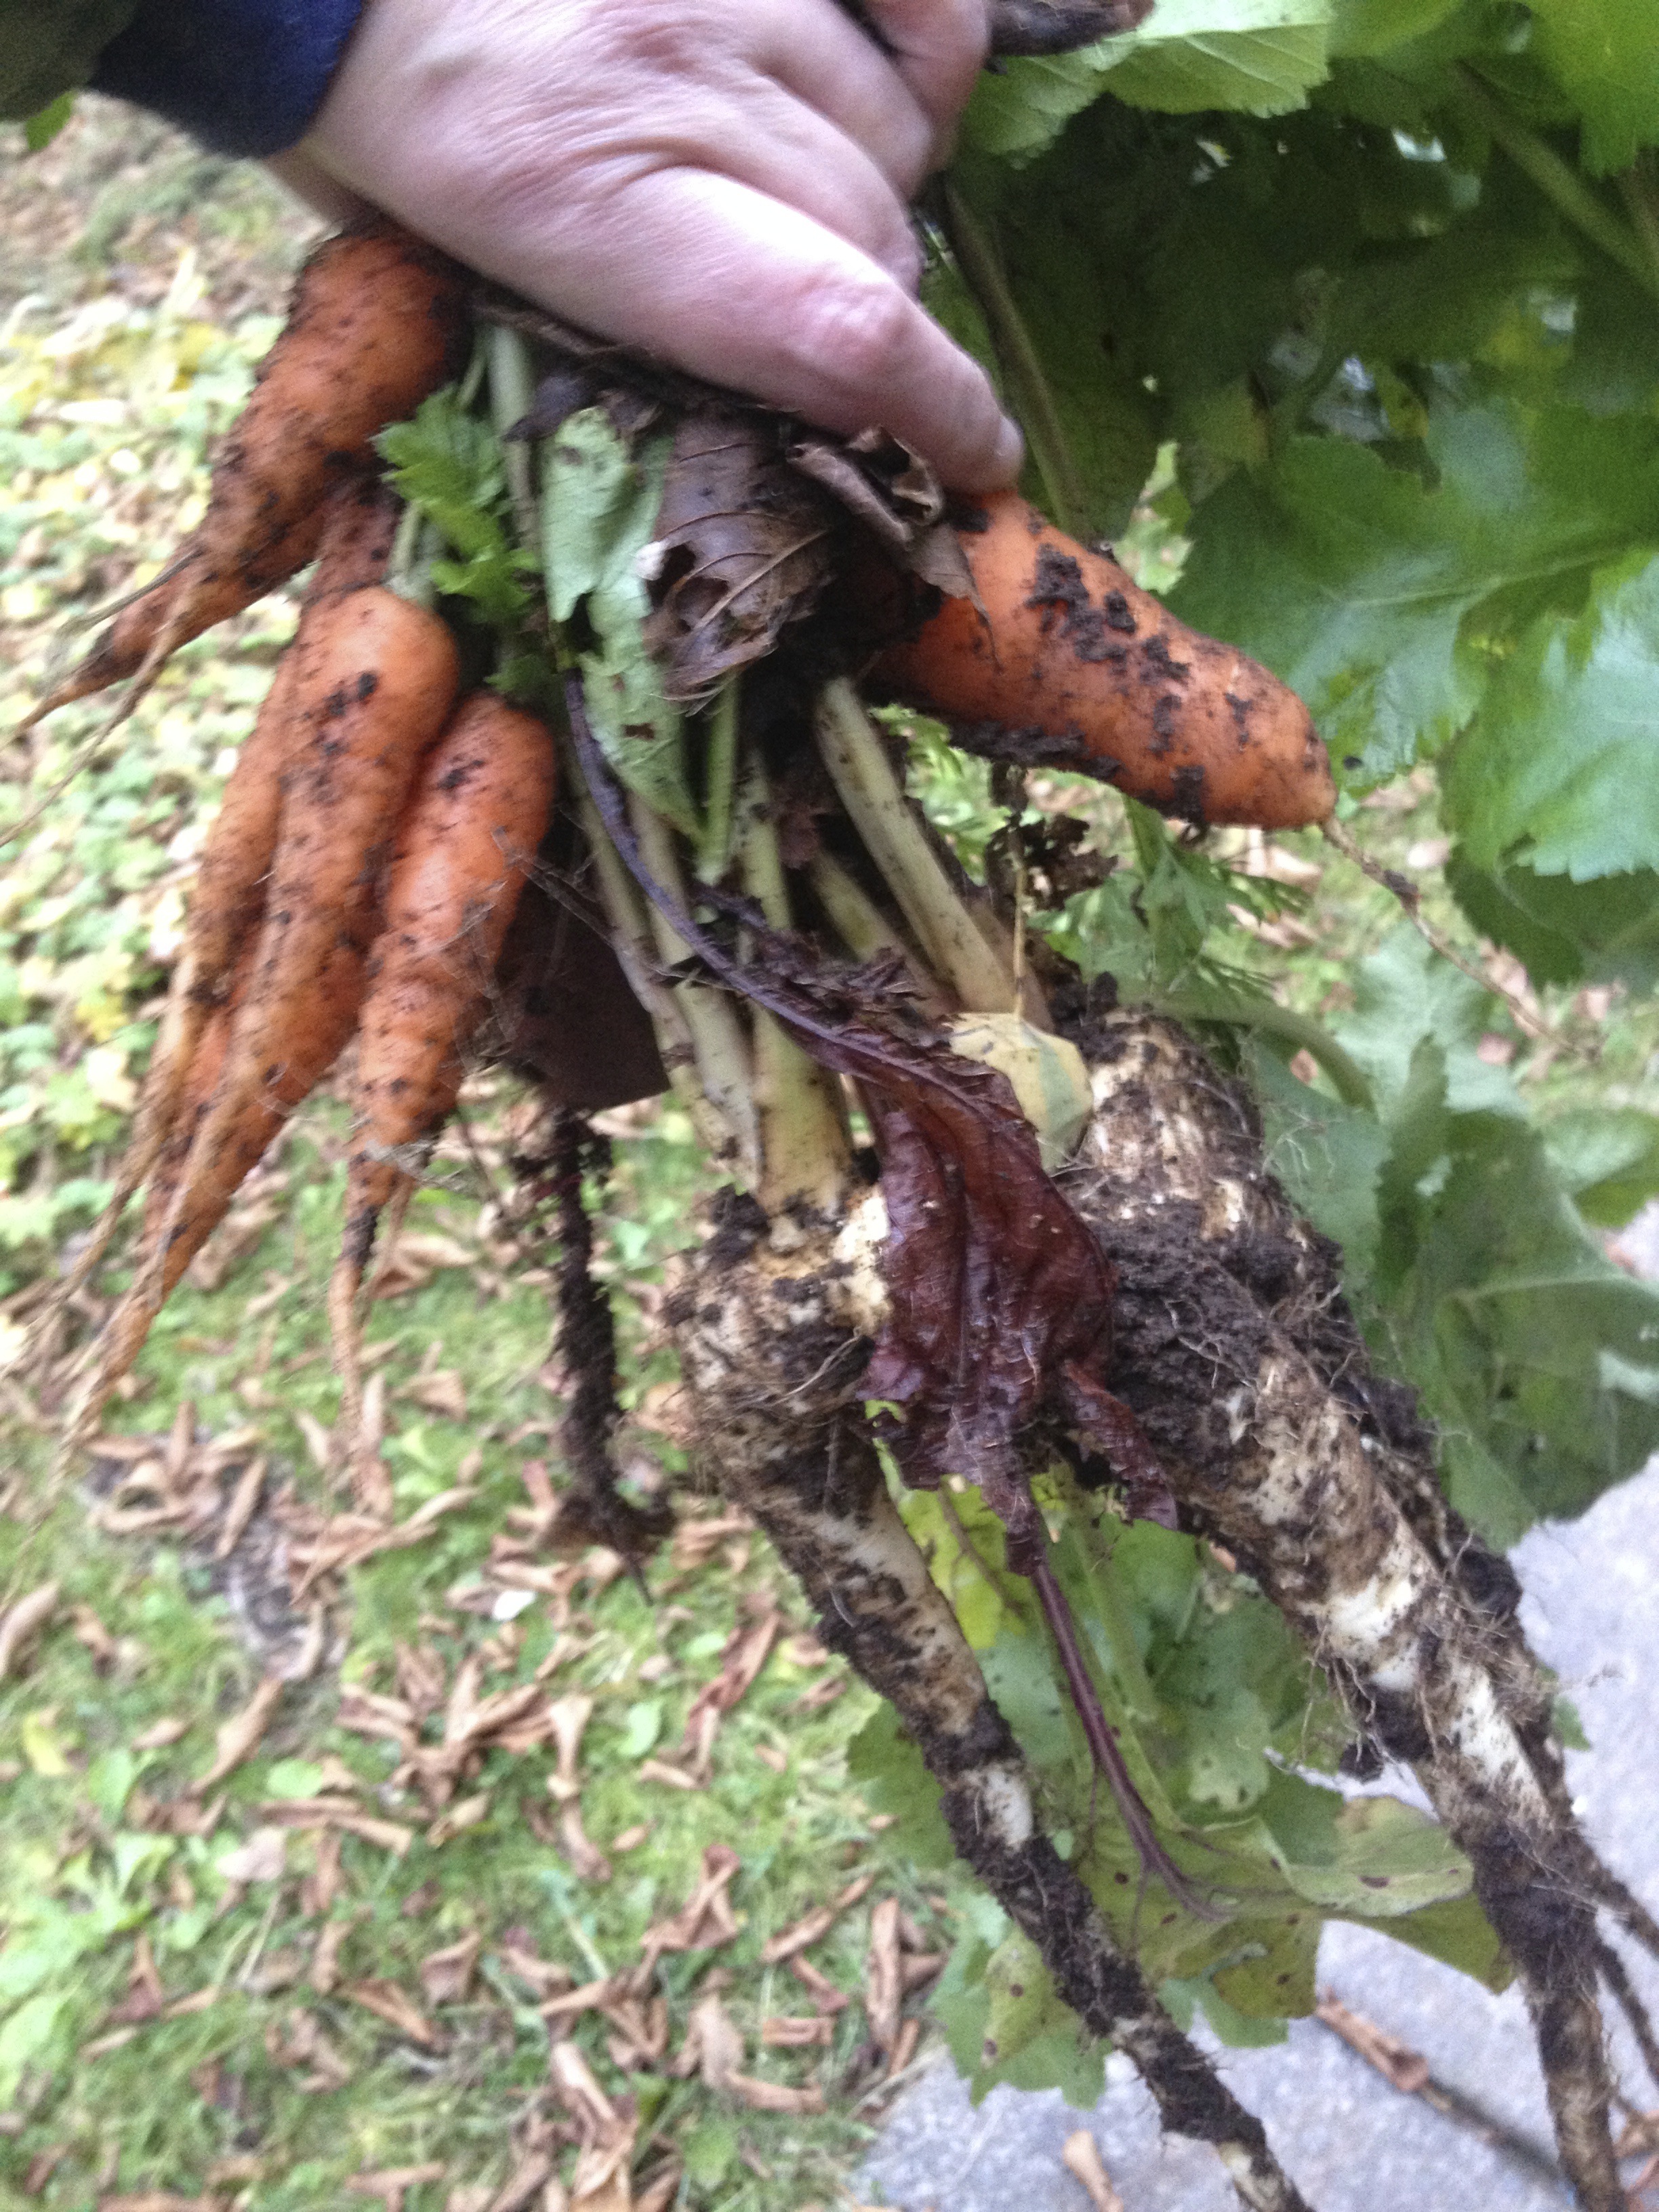 beets and carrots just pulled from the late fall garden